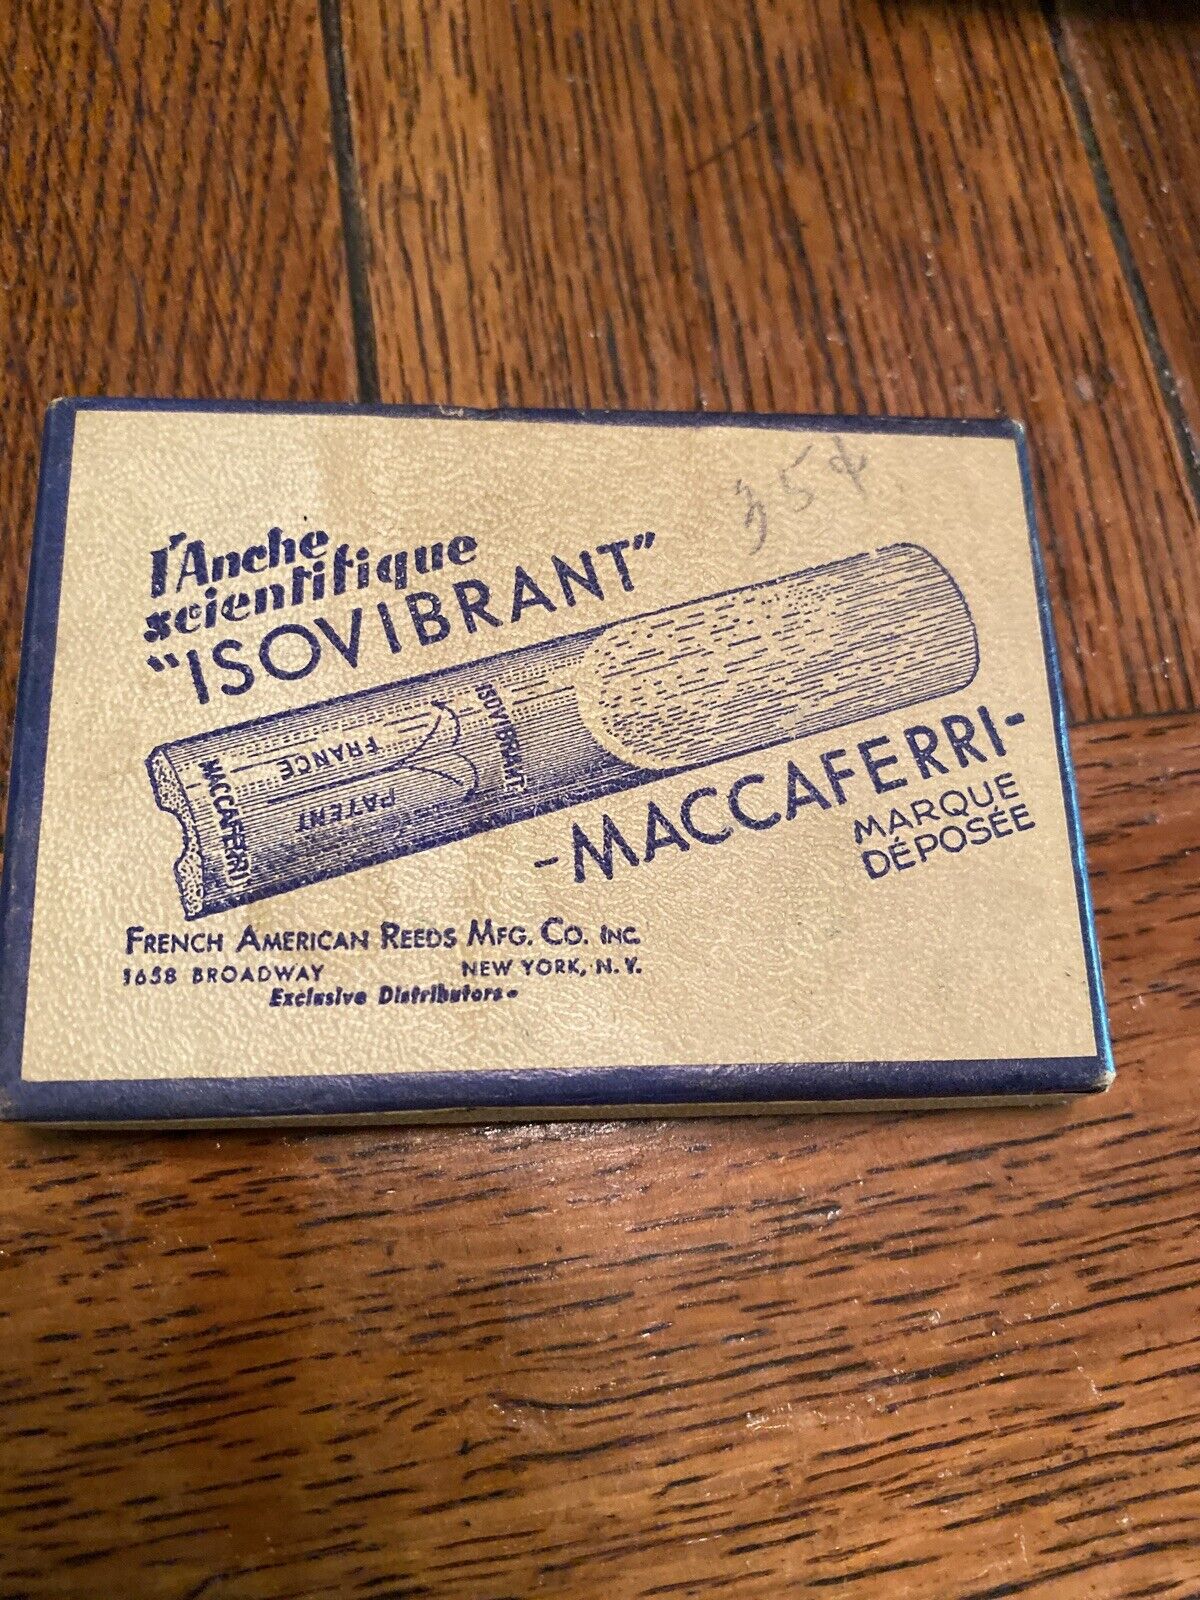 Vintage Isovibrant Maccaferri Fench American Reed EMPTY Box LID ONLY Sax Tenor